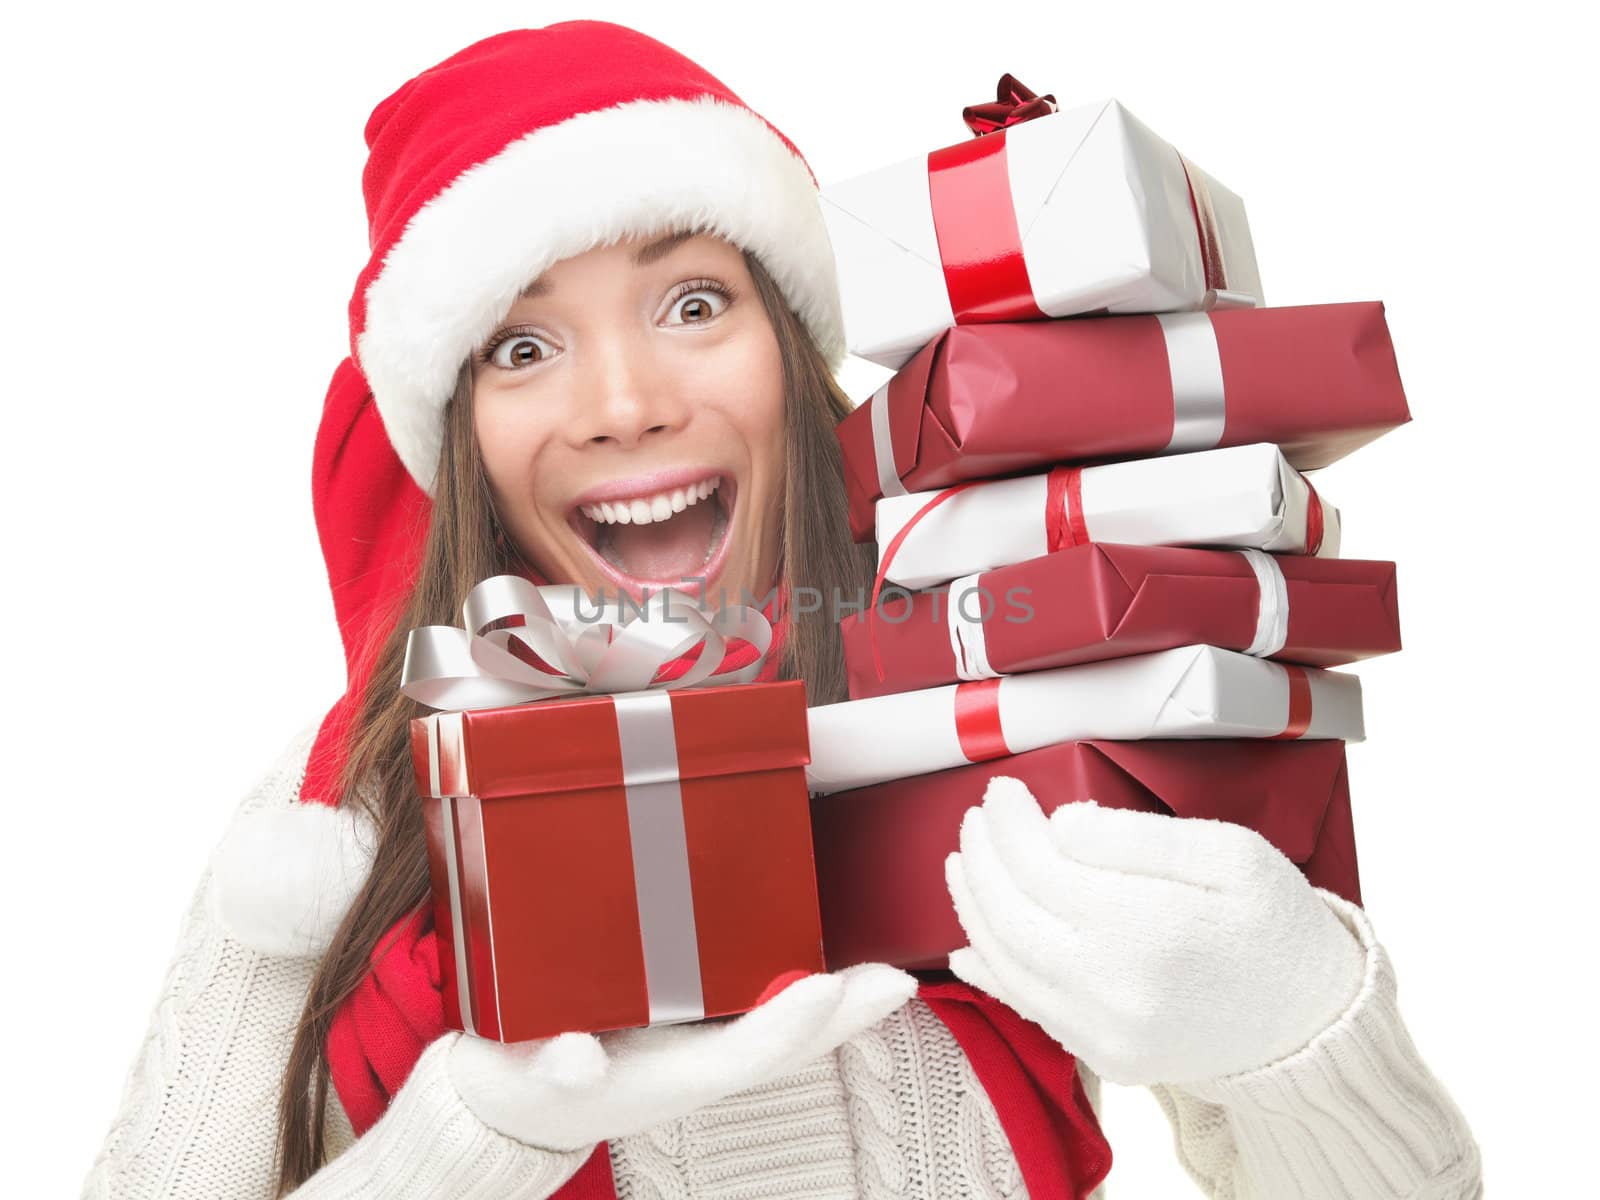 Christmas shopping woman holding gifts wearing red Santa hat. Funny santa woman portrait of a cute, beautiful smiling Asian / Caucasian model. Isolated on white background. 